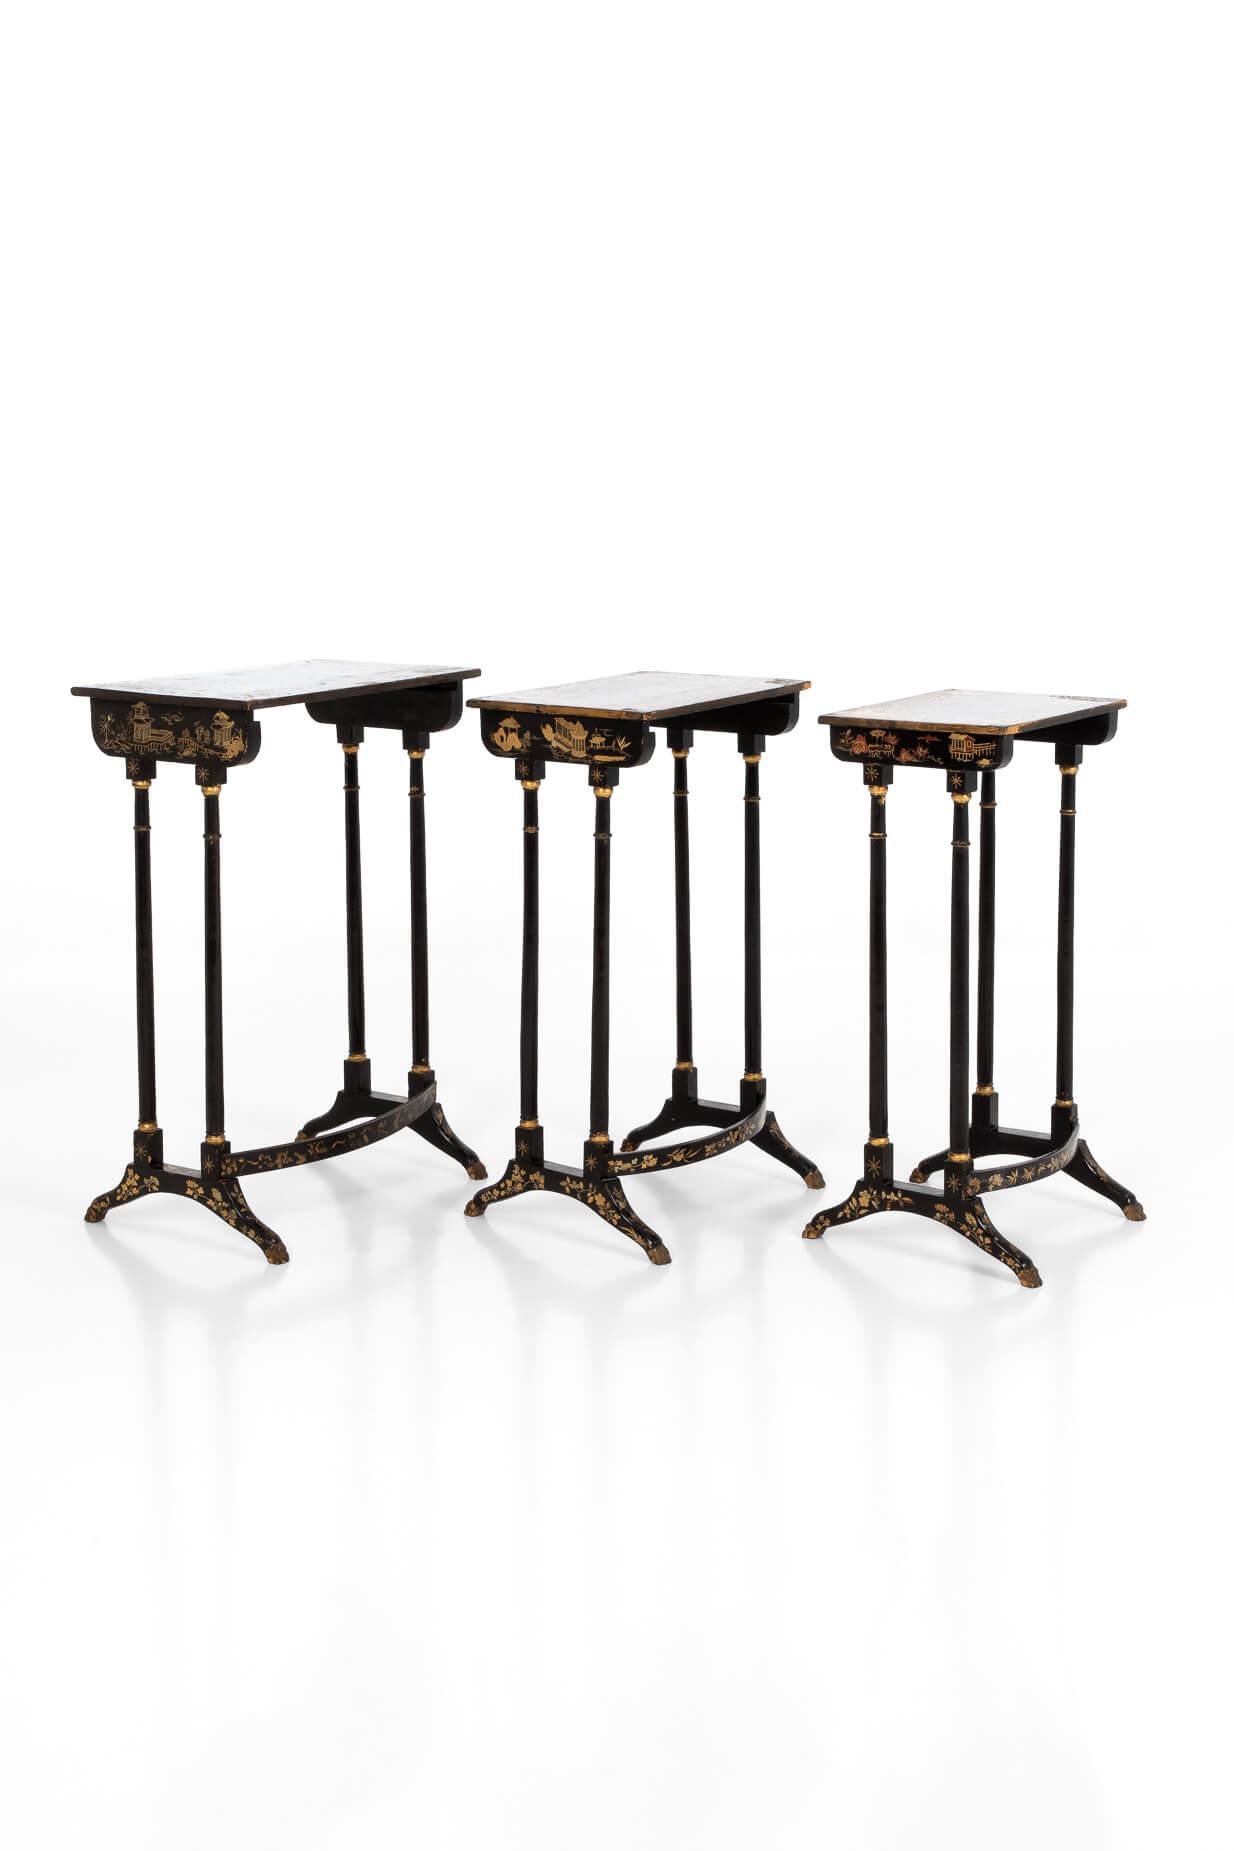 A nest of three wonderful Regency chinoiserie gilt and black lacquer tables. Below the Jappaned surfaces, the table tops are intricately decorated with exquisite scenes from the Far East, with three different scenes depicted on each table. Raised on